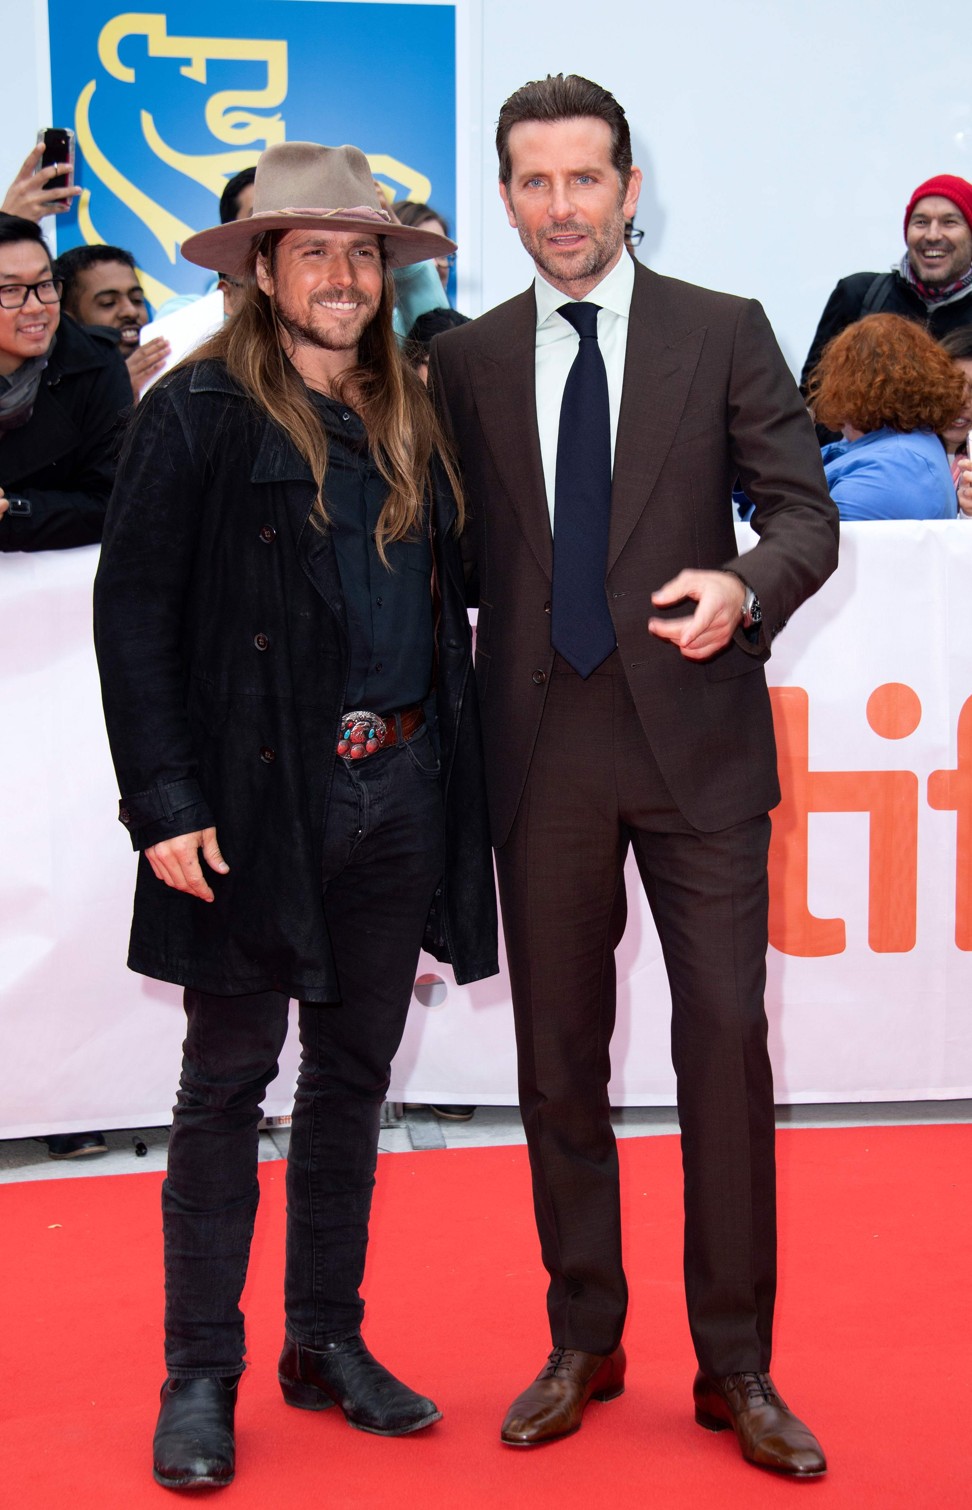 Songwriter Lukas Nelson and Cooper at the premiere in Toronto. Photo: AFP